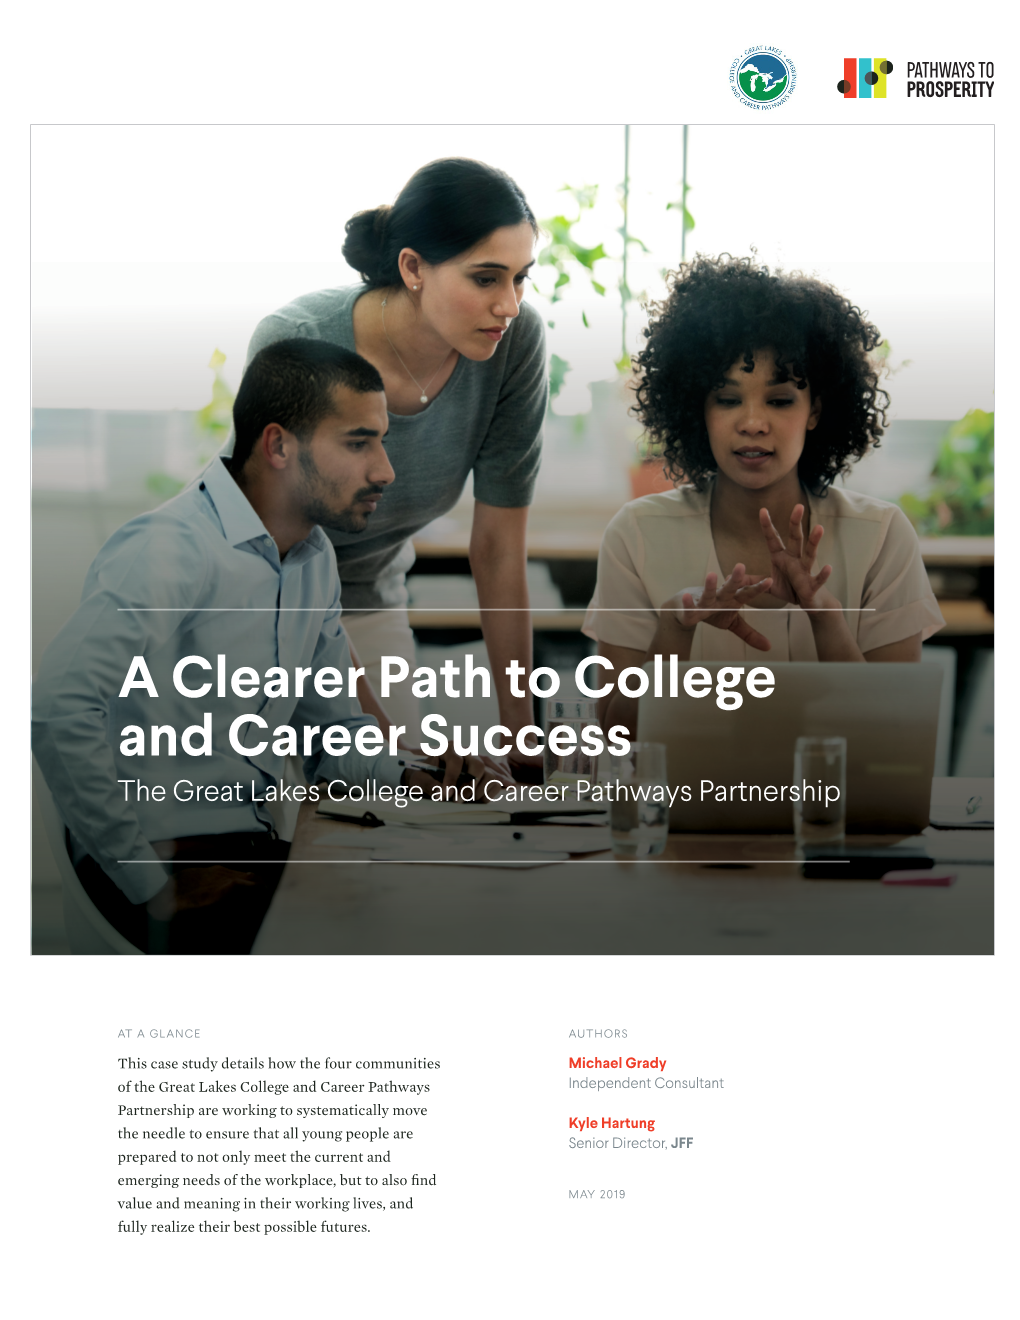 A Clearer Path to College and Career Success the Great Lakes College and Career Pathways Partnership